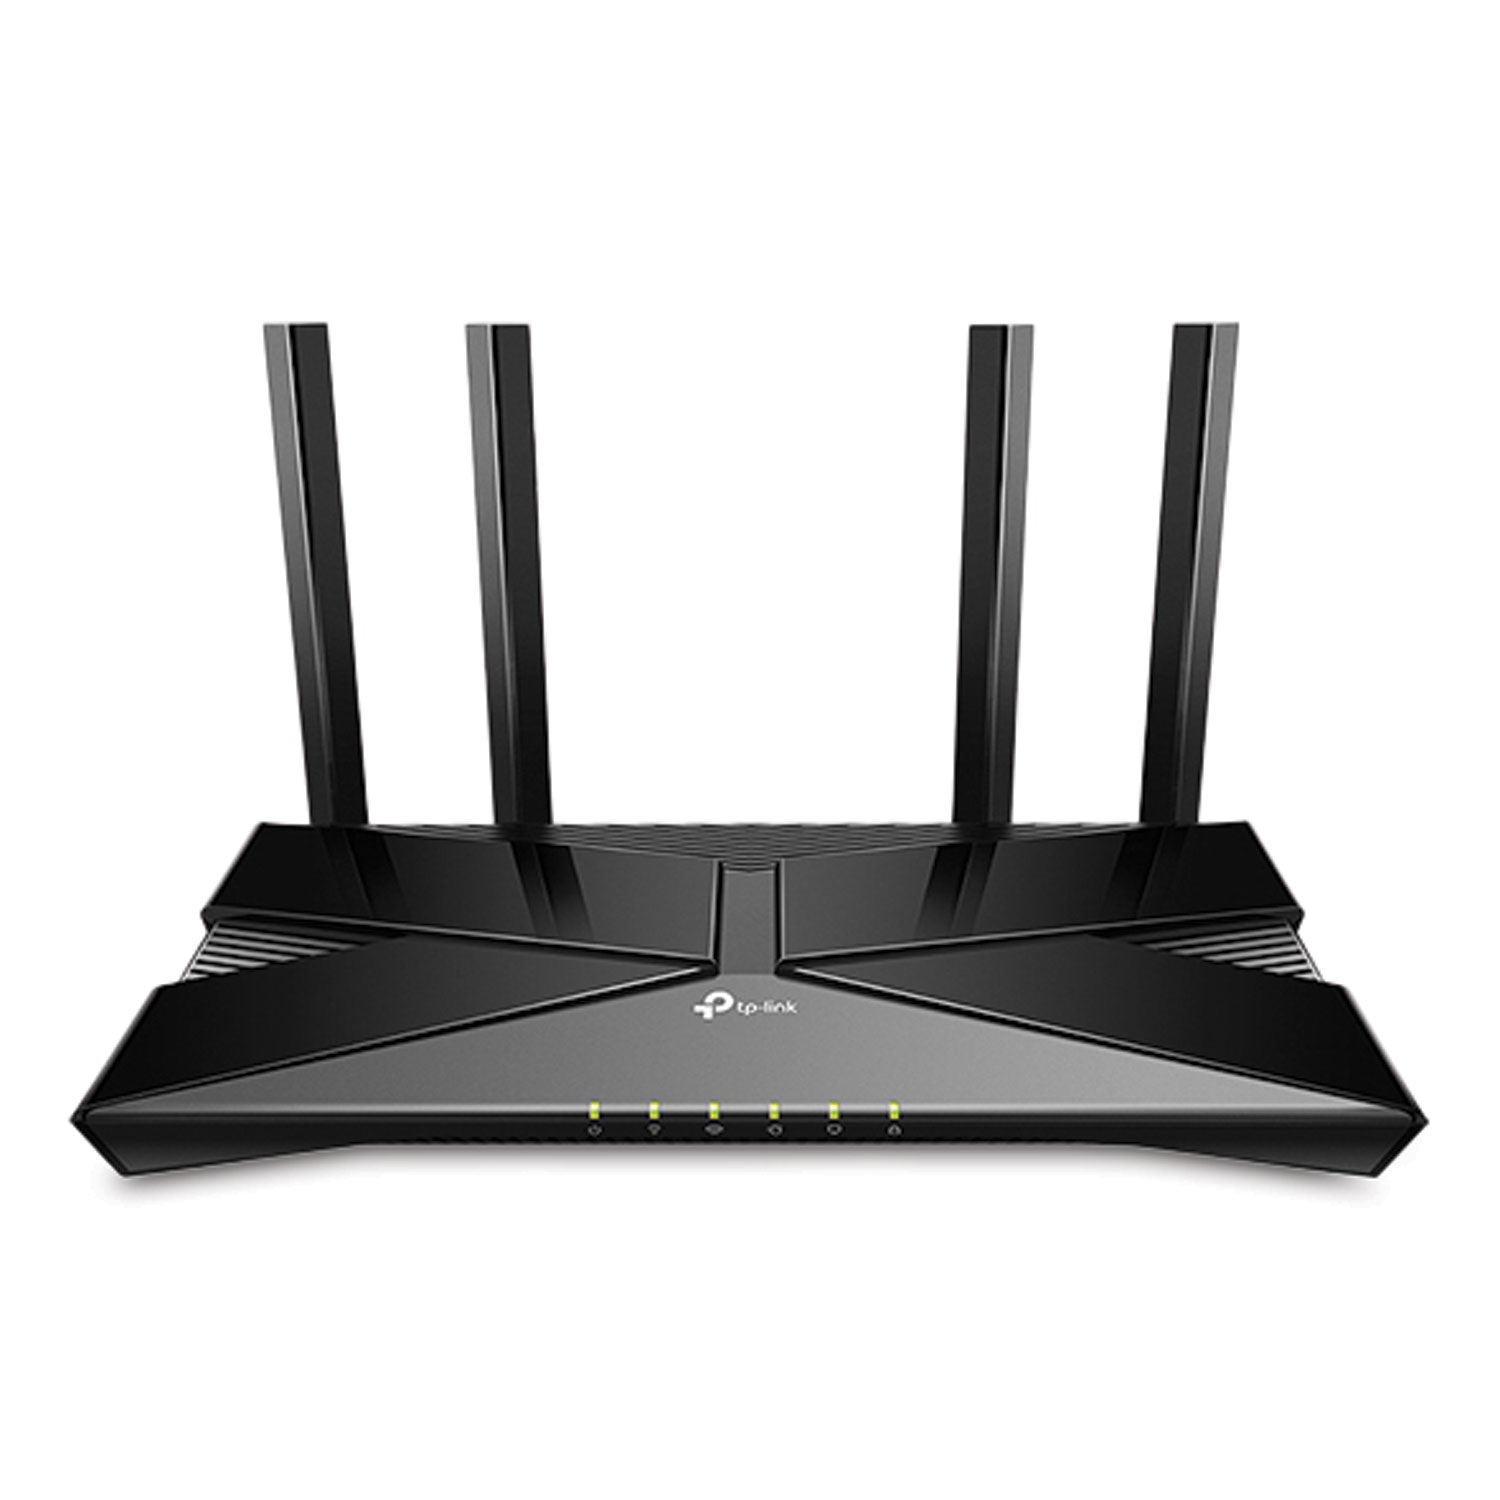 archer-ax1500-wireless-and-ethernet-router-5-ports-dual-band-24-ghz-5-ghz_tplarcherax1500 - 1